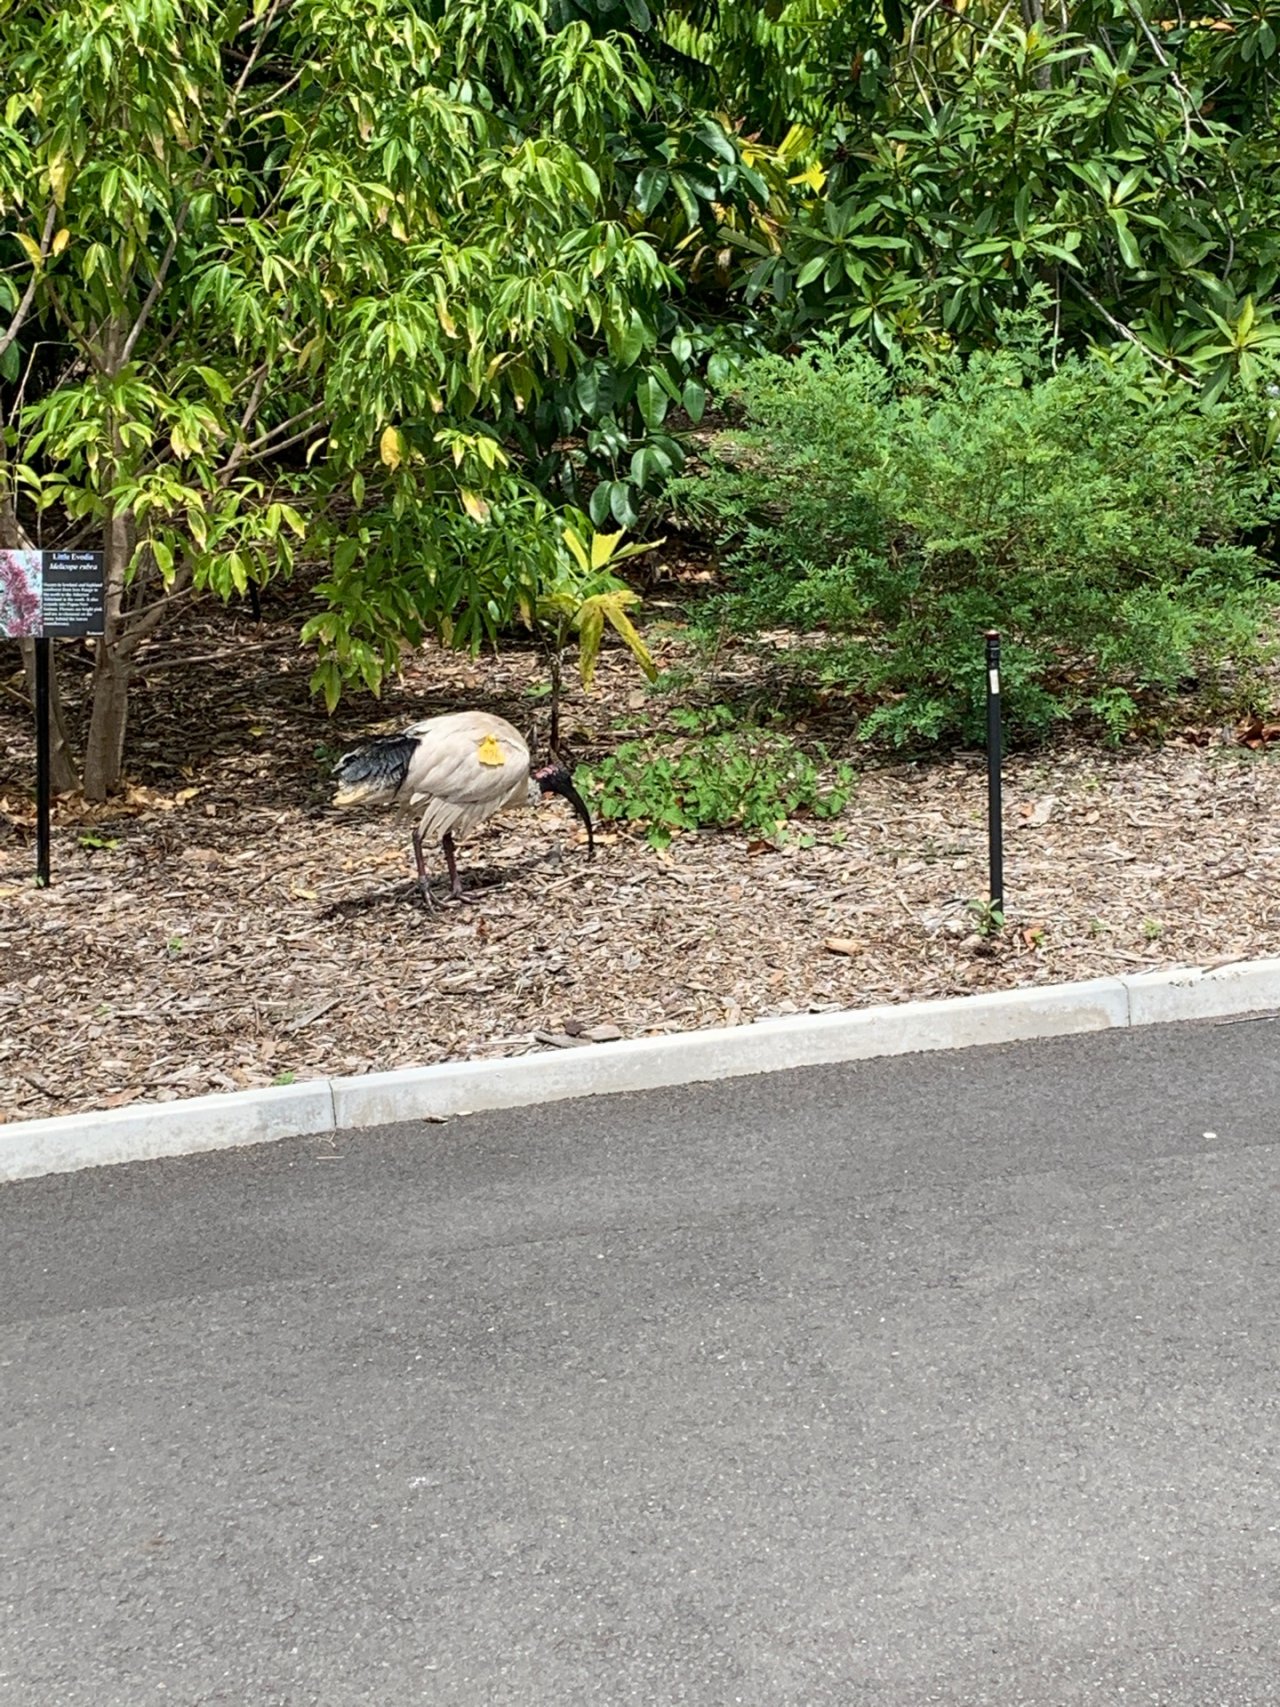 White Ibis in Big City Birds App spotted by Laurie McGuirk on 12.12.2020